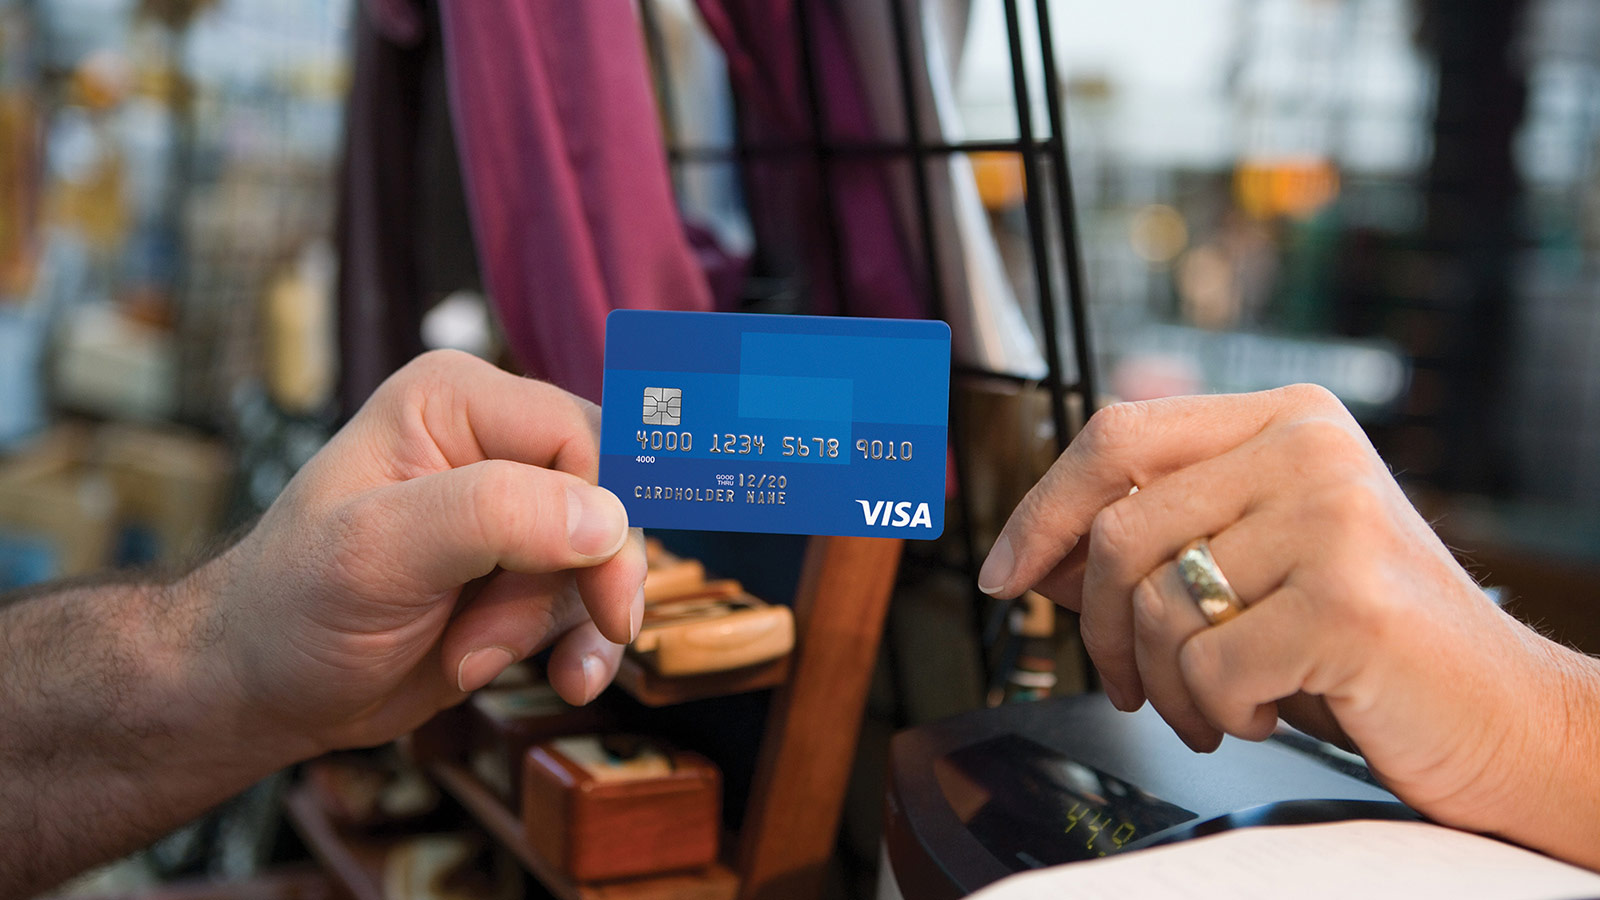 Customer making a secure purchase with a Visa EMV chip card